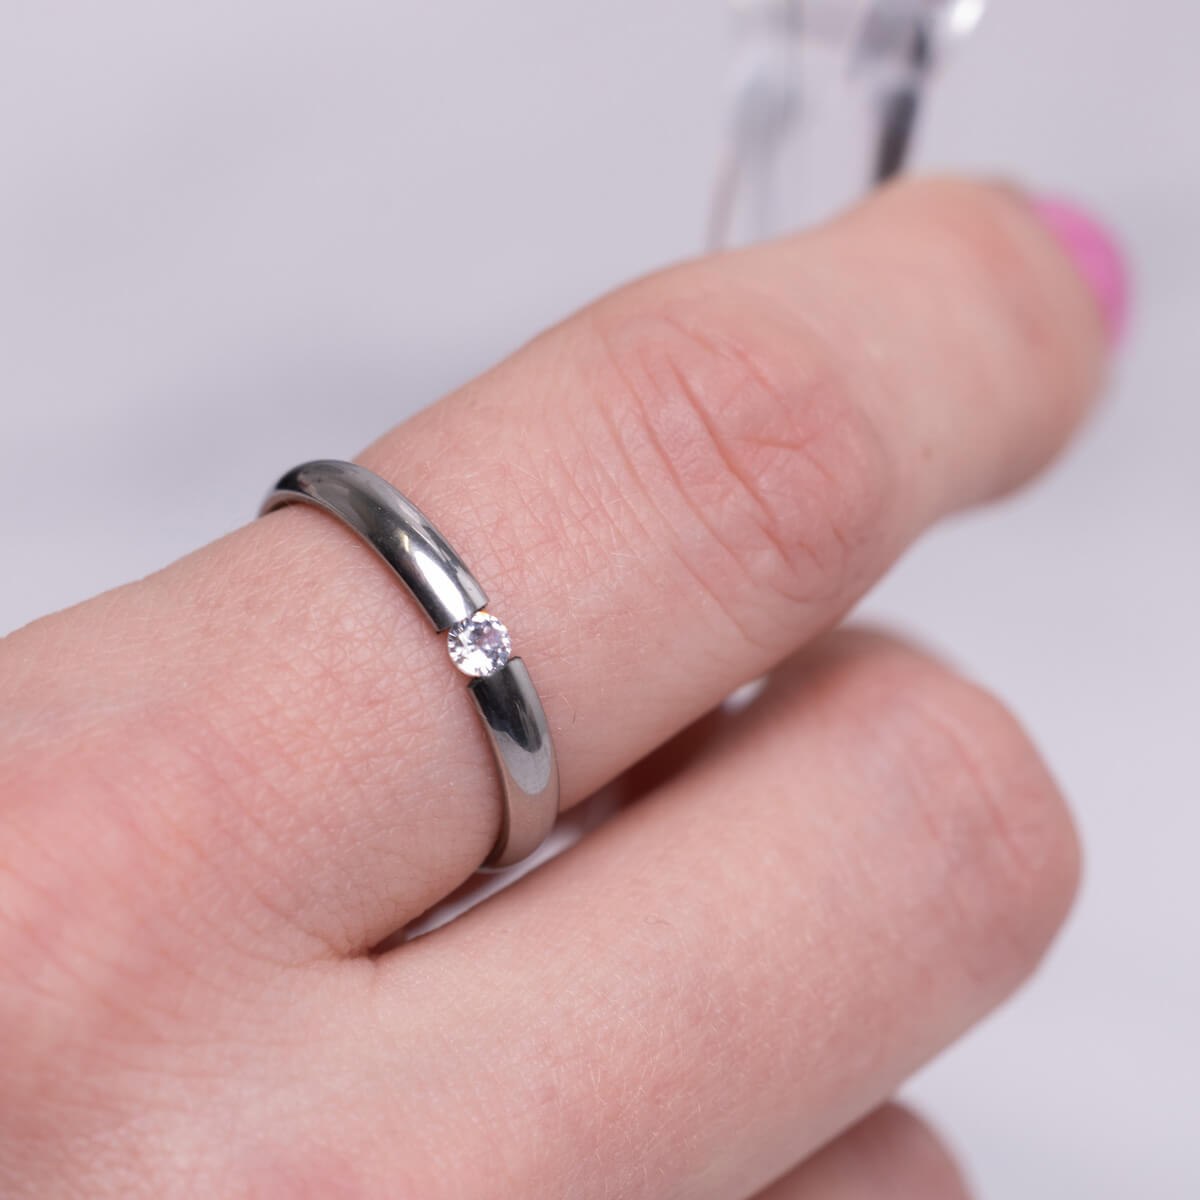 Narrow ring with zirconia stone 3mm (Steel 316L)